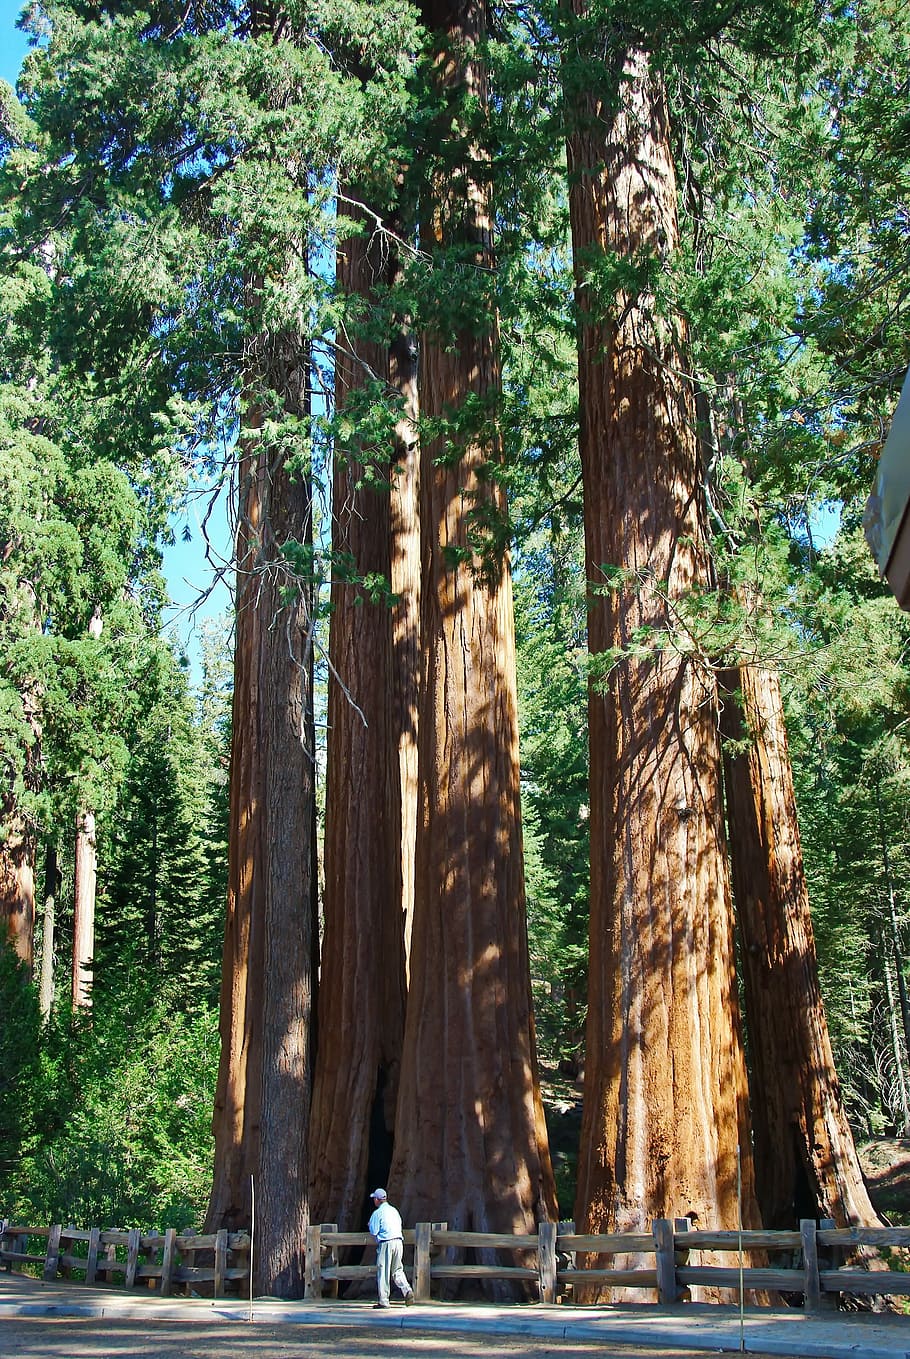 Usa, Sequoia Park, Redwoods, Tree, immensity, power, botany, height, tree trunk, nature